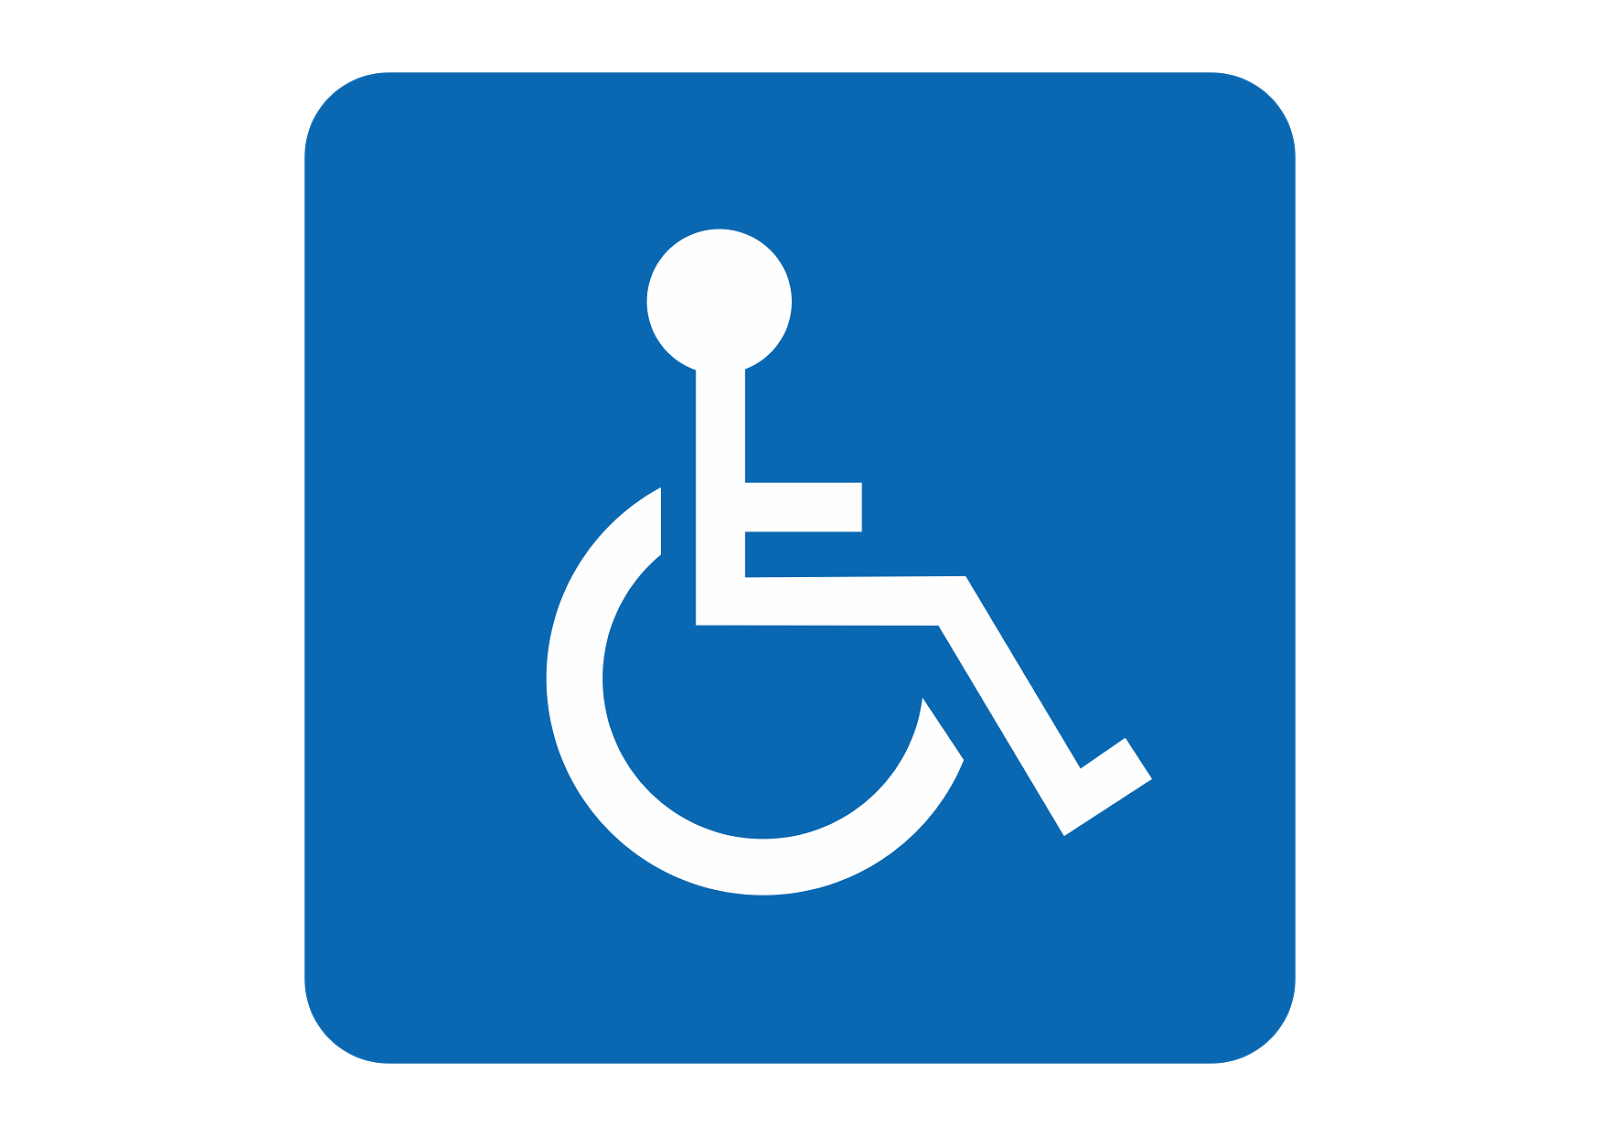 Wheelchair accessible Logo Vector ~ Format Cdr, Ai, Eps, Svg, PDF, PNG ...